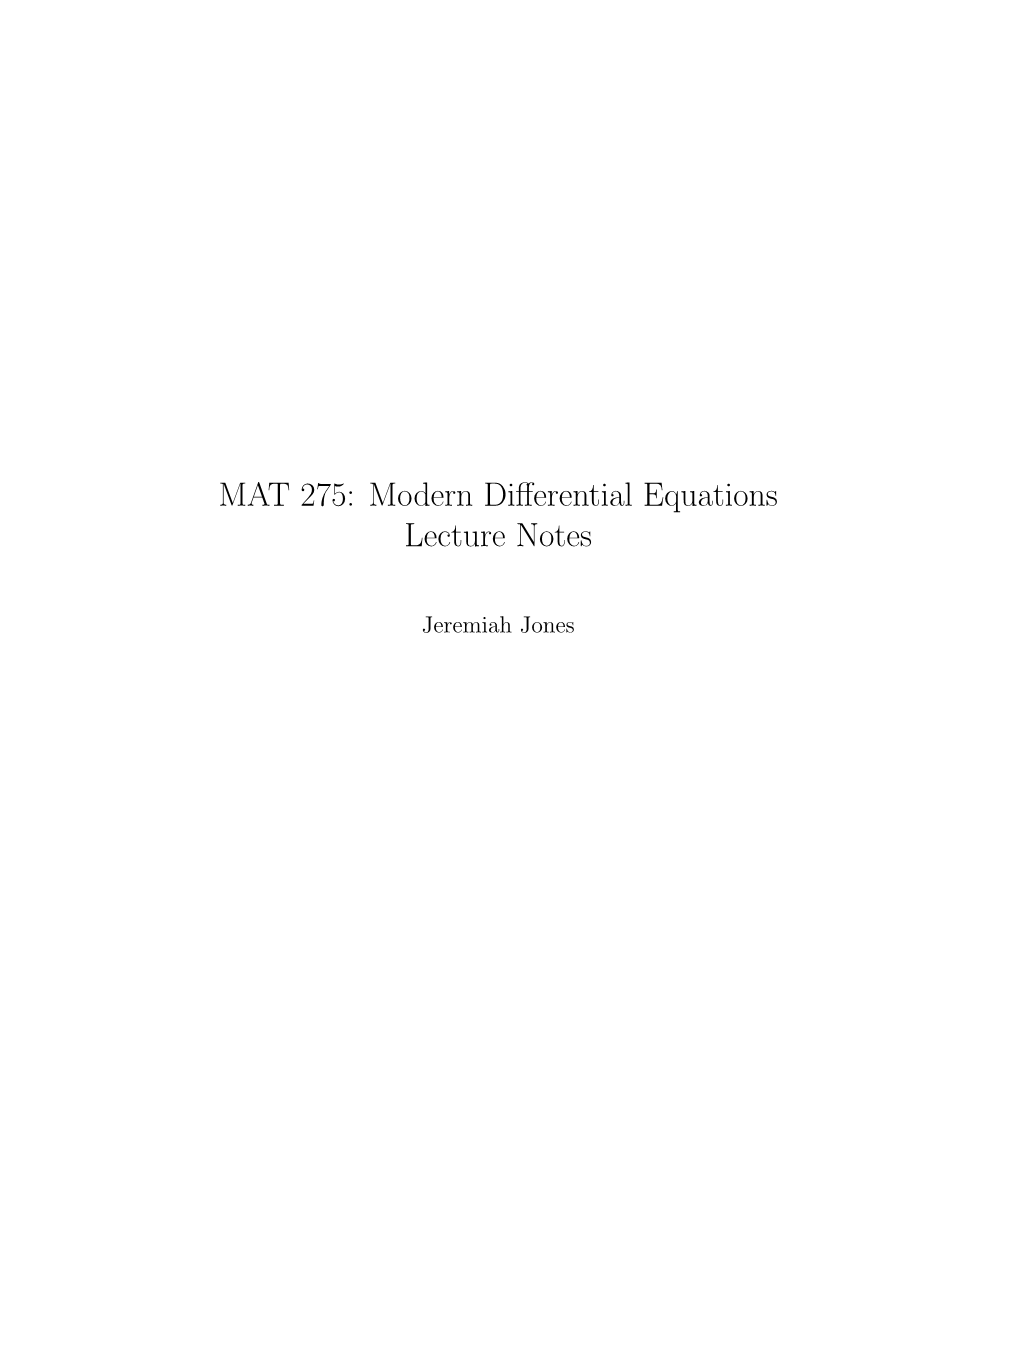 MAT 275: Modern Differential Equations Lecture Notes